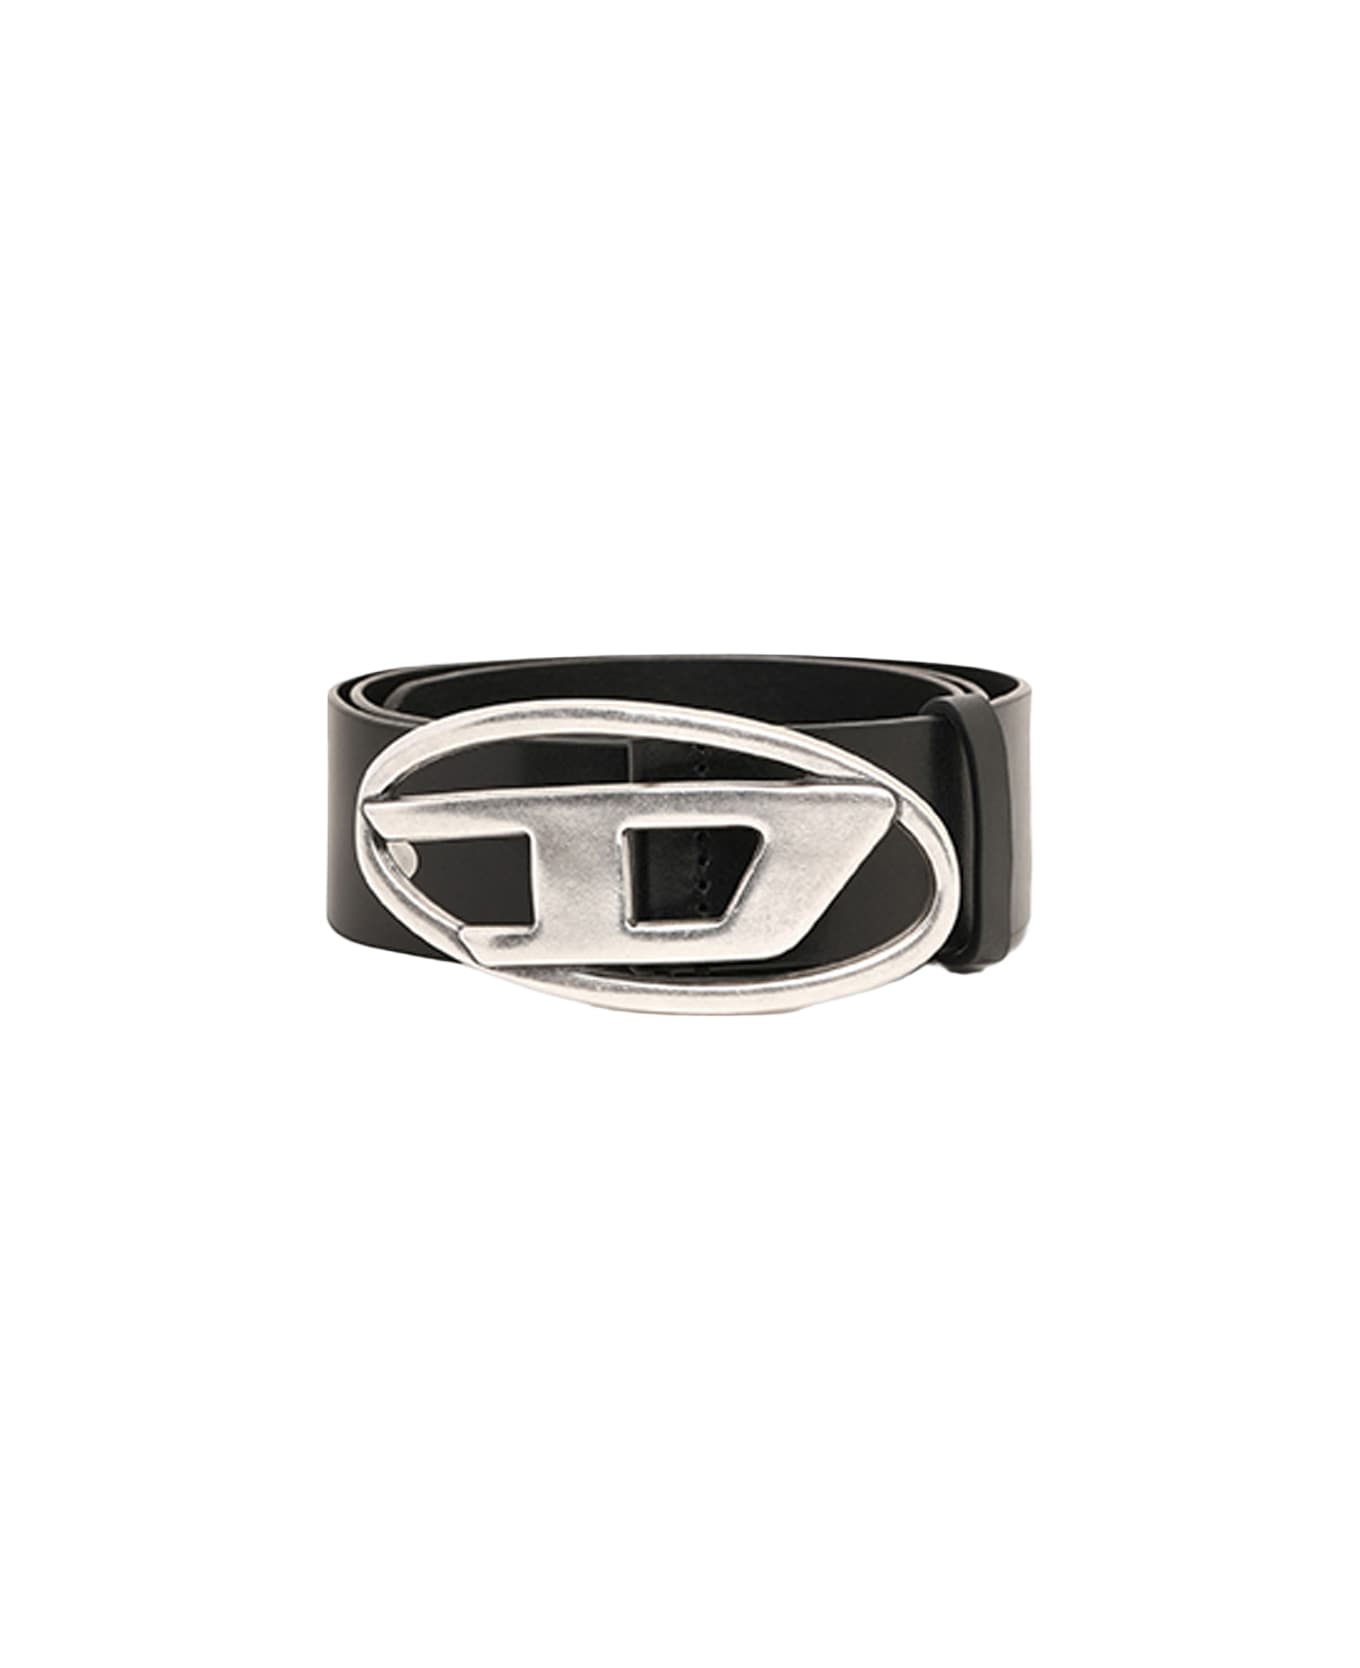 Diesel B-1dr Black leather belt with Oval D buckle - B 1DR - Nero